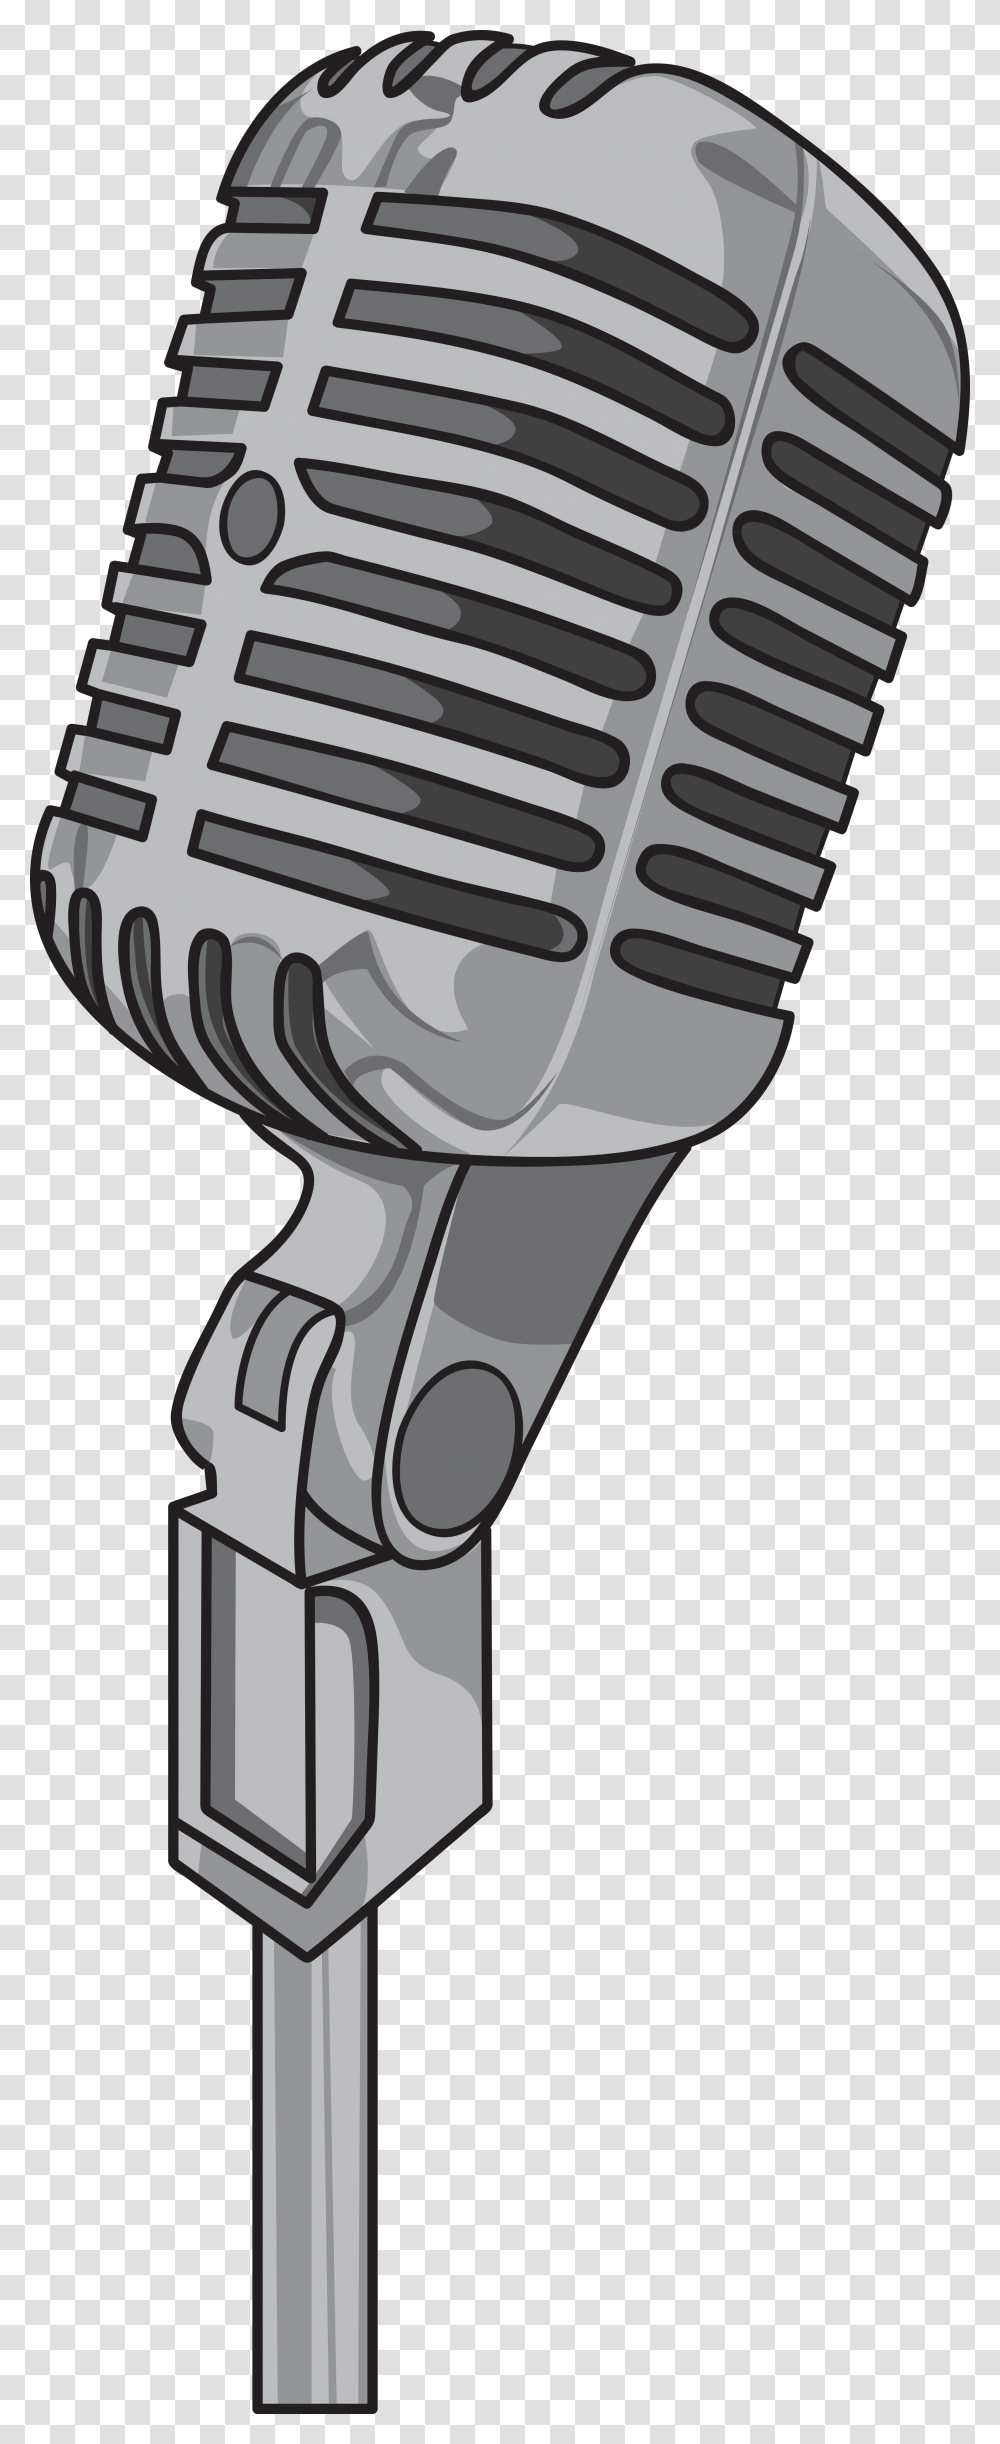 Microphone Vector Microphone Vector Microphone Vector, Electrical Device, Blow Dryer, Appliance, Hair Drier Transparent Png